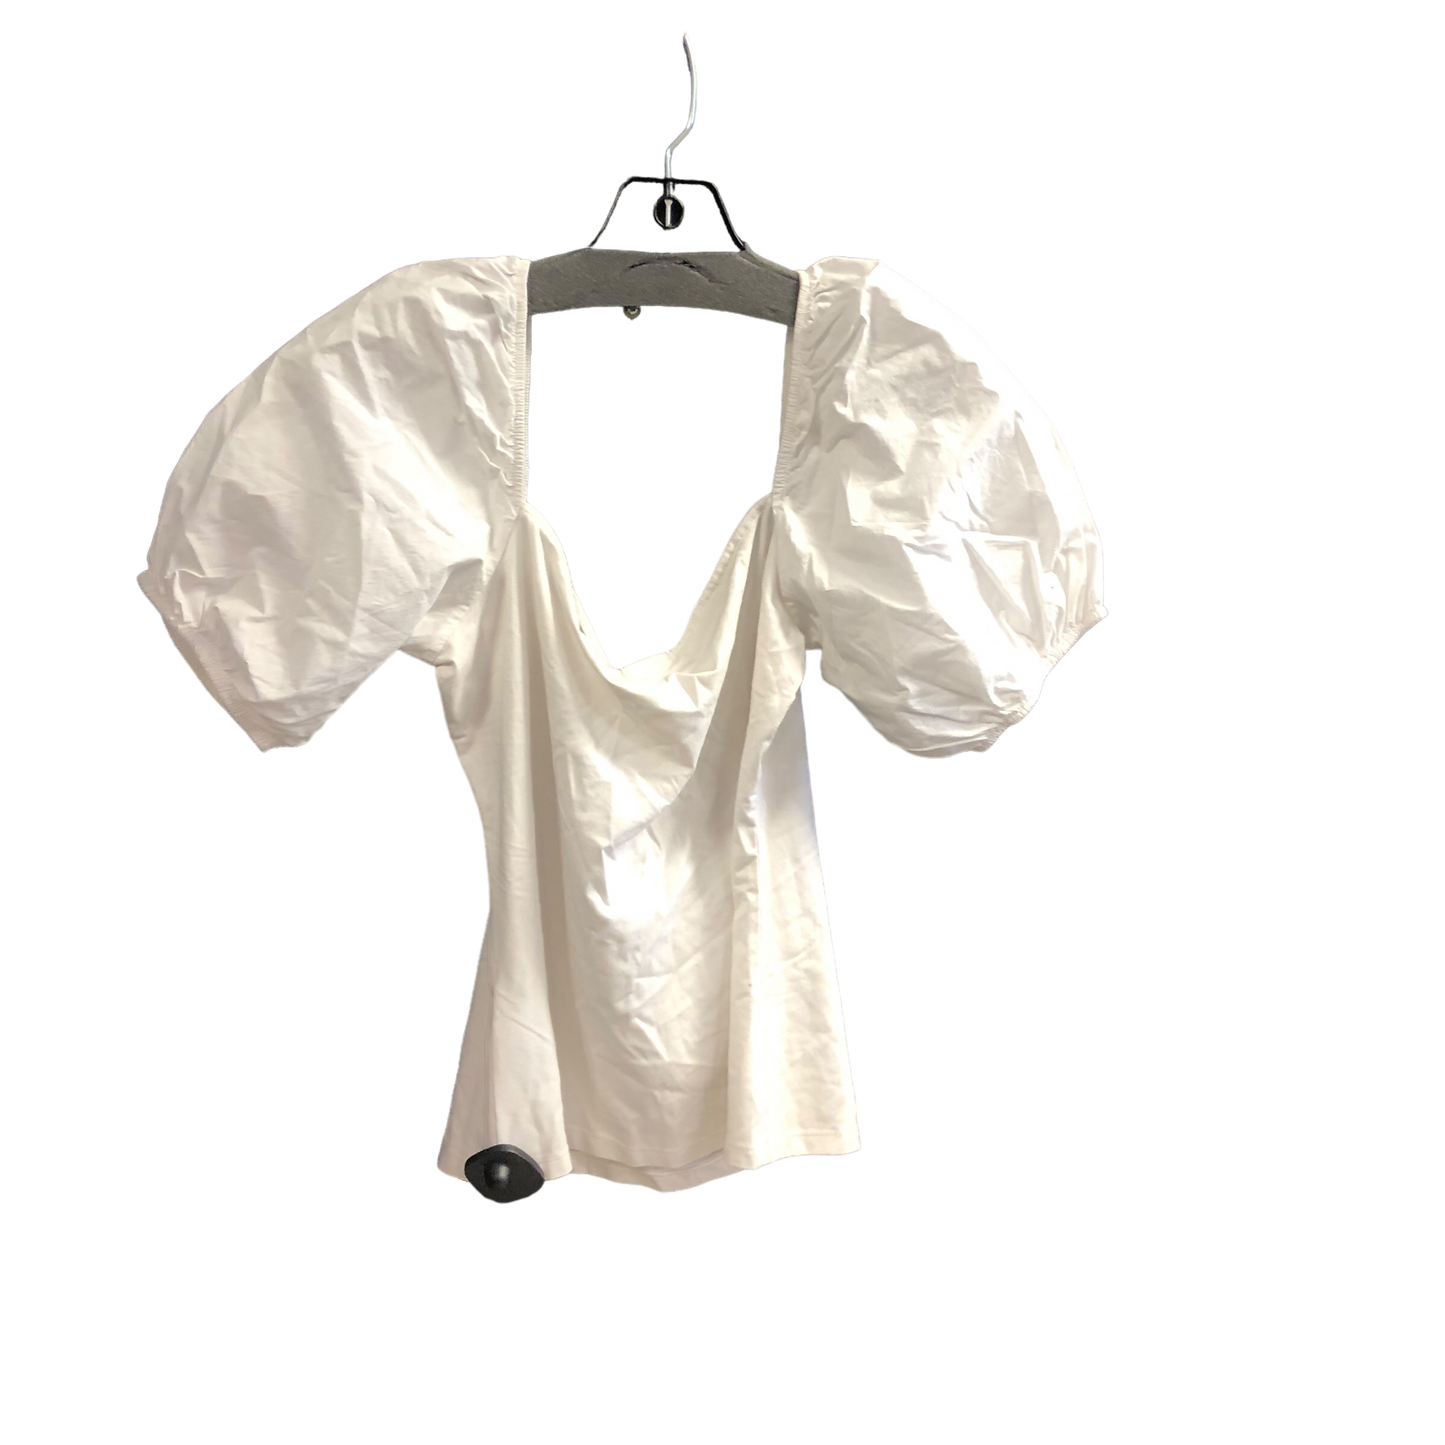 White Top Short Sleeve H&m, Size M